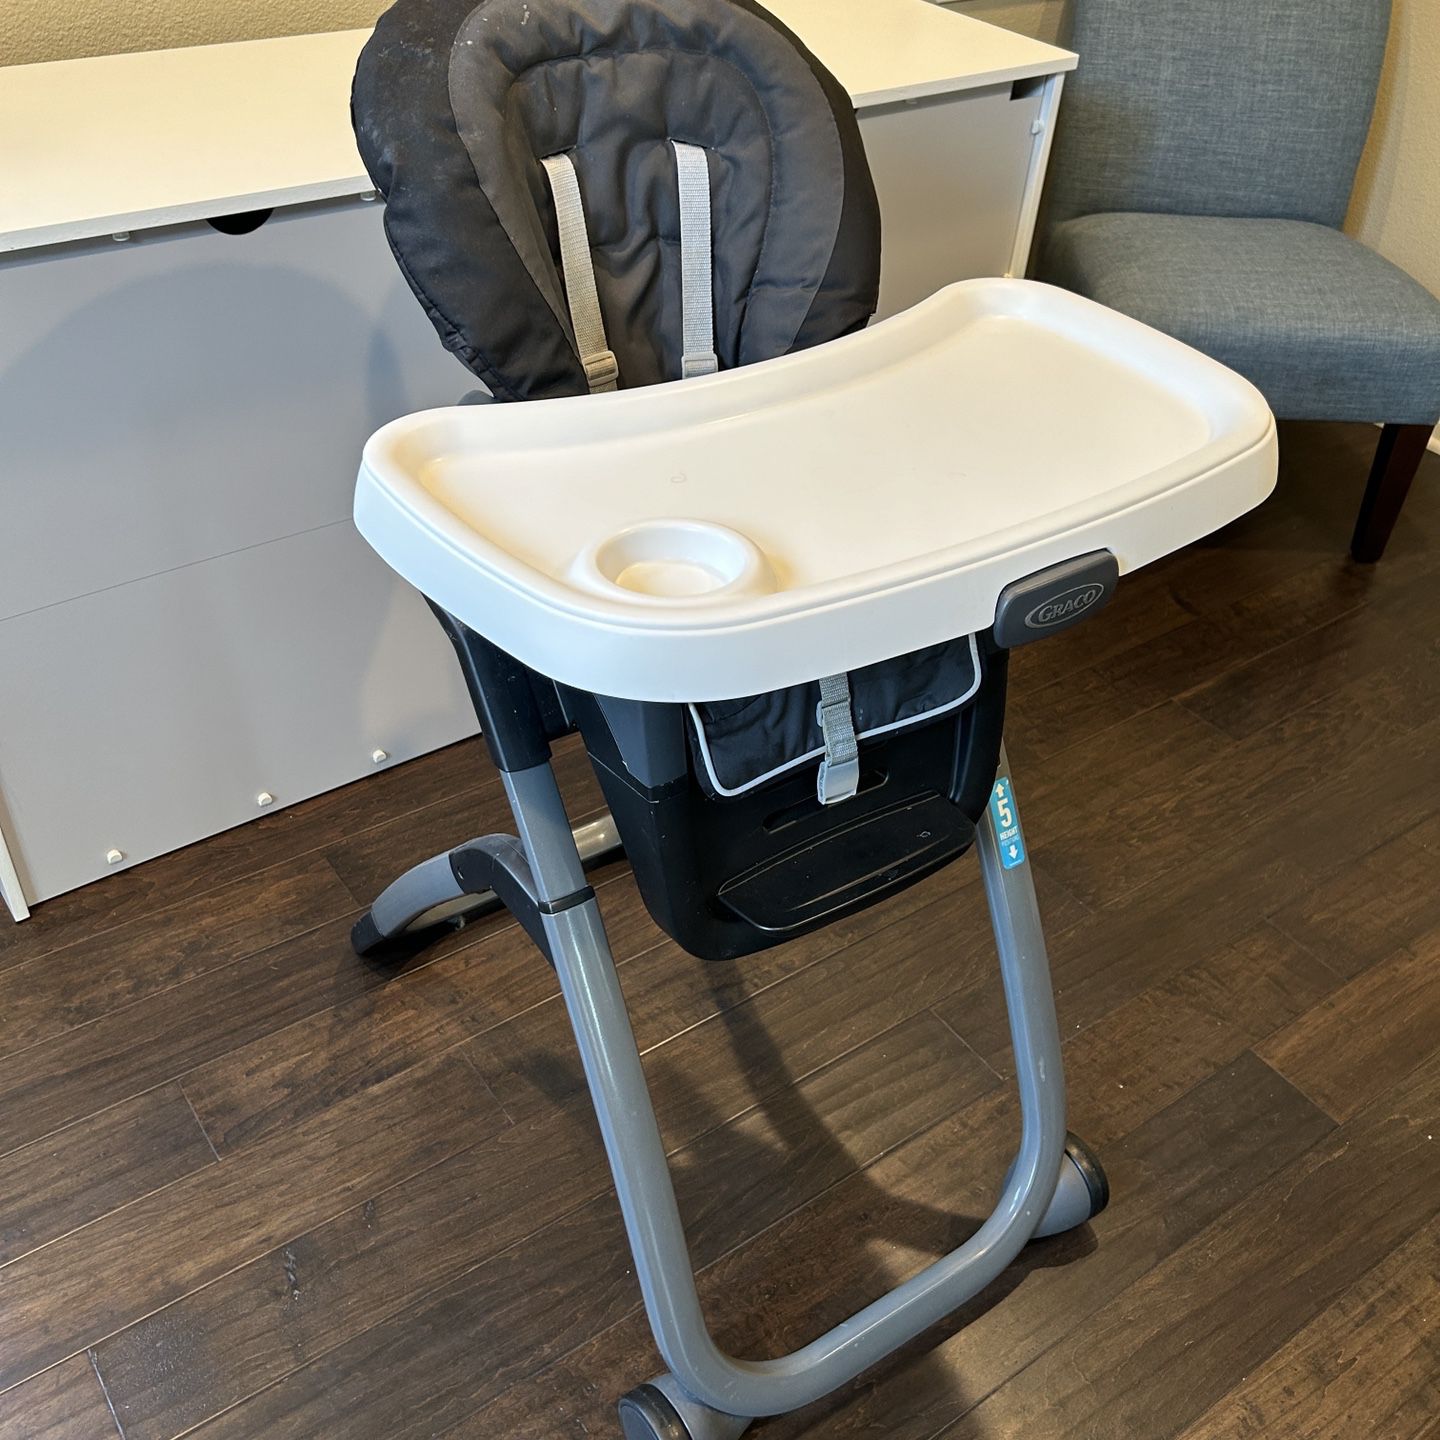 Graco DuoDiner DLX 6-in-1 Highchair